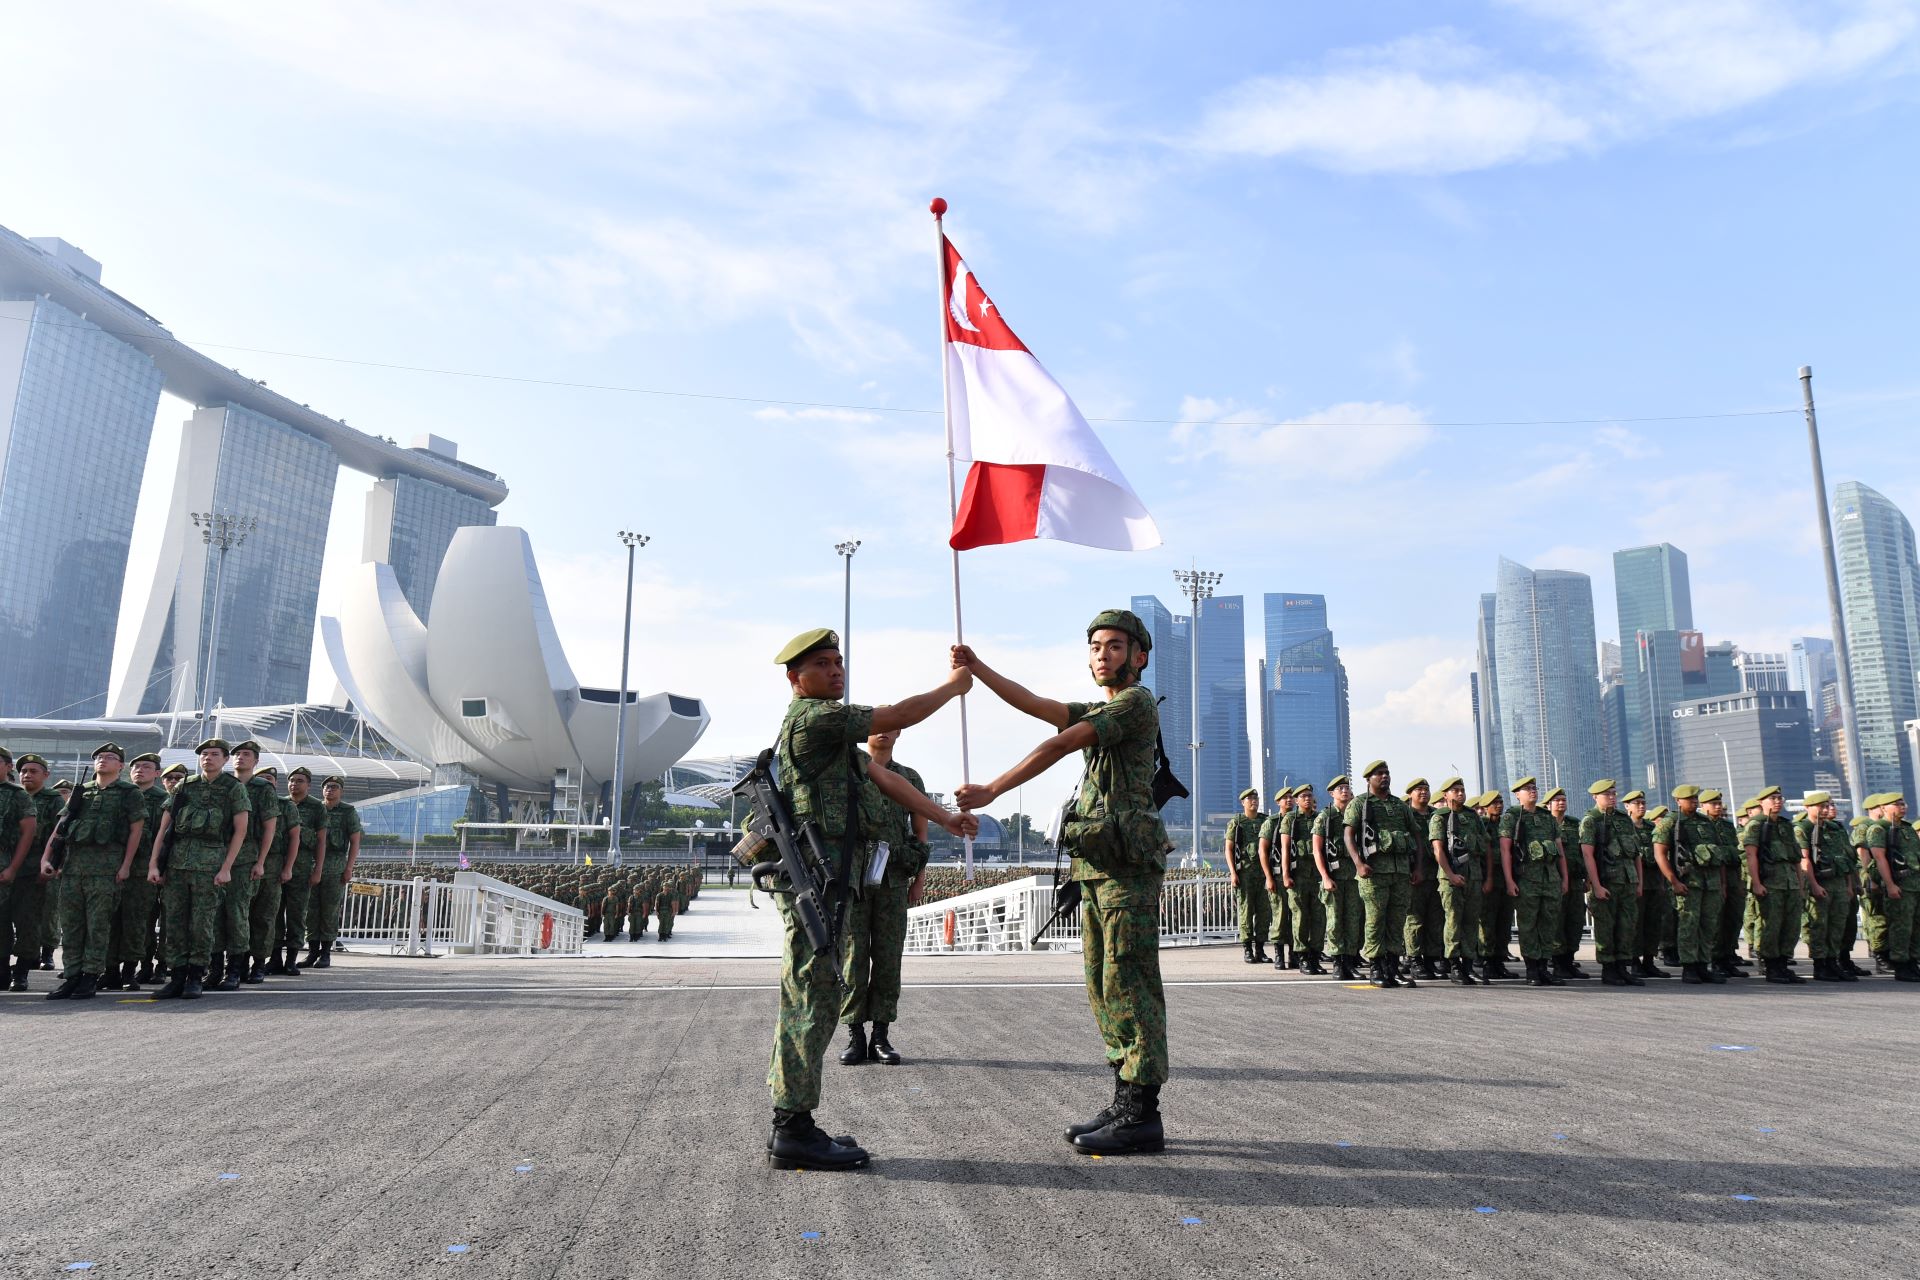 NS55 rounds off celebrations with integrated parade at The Float